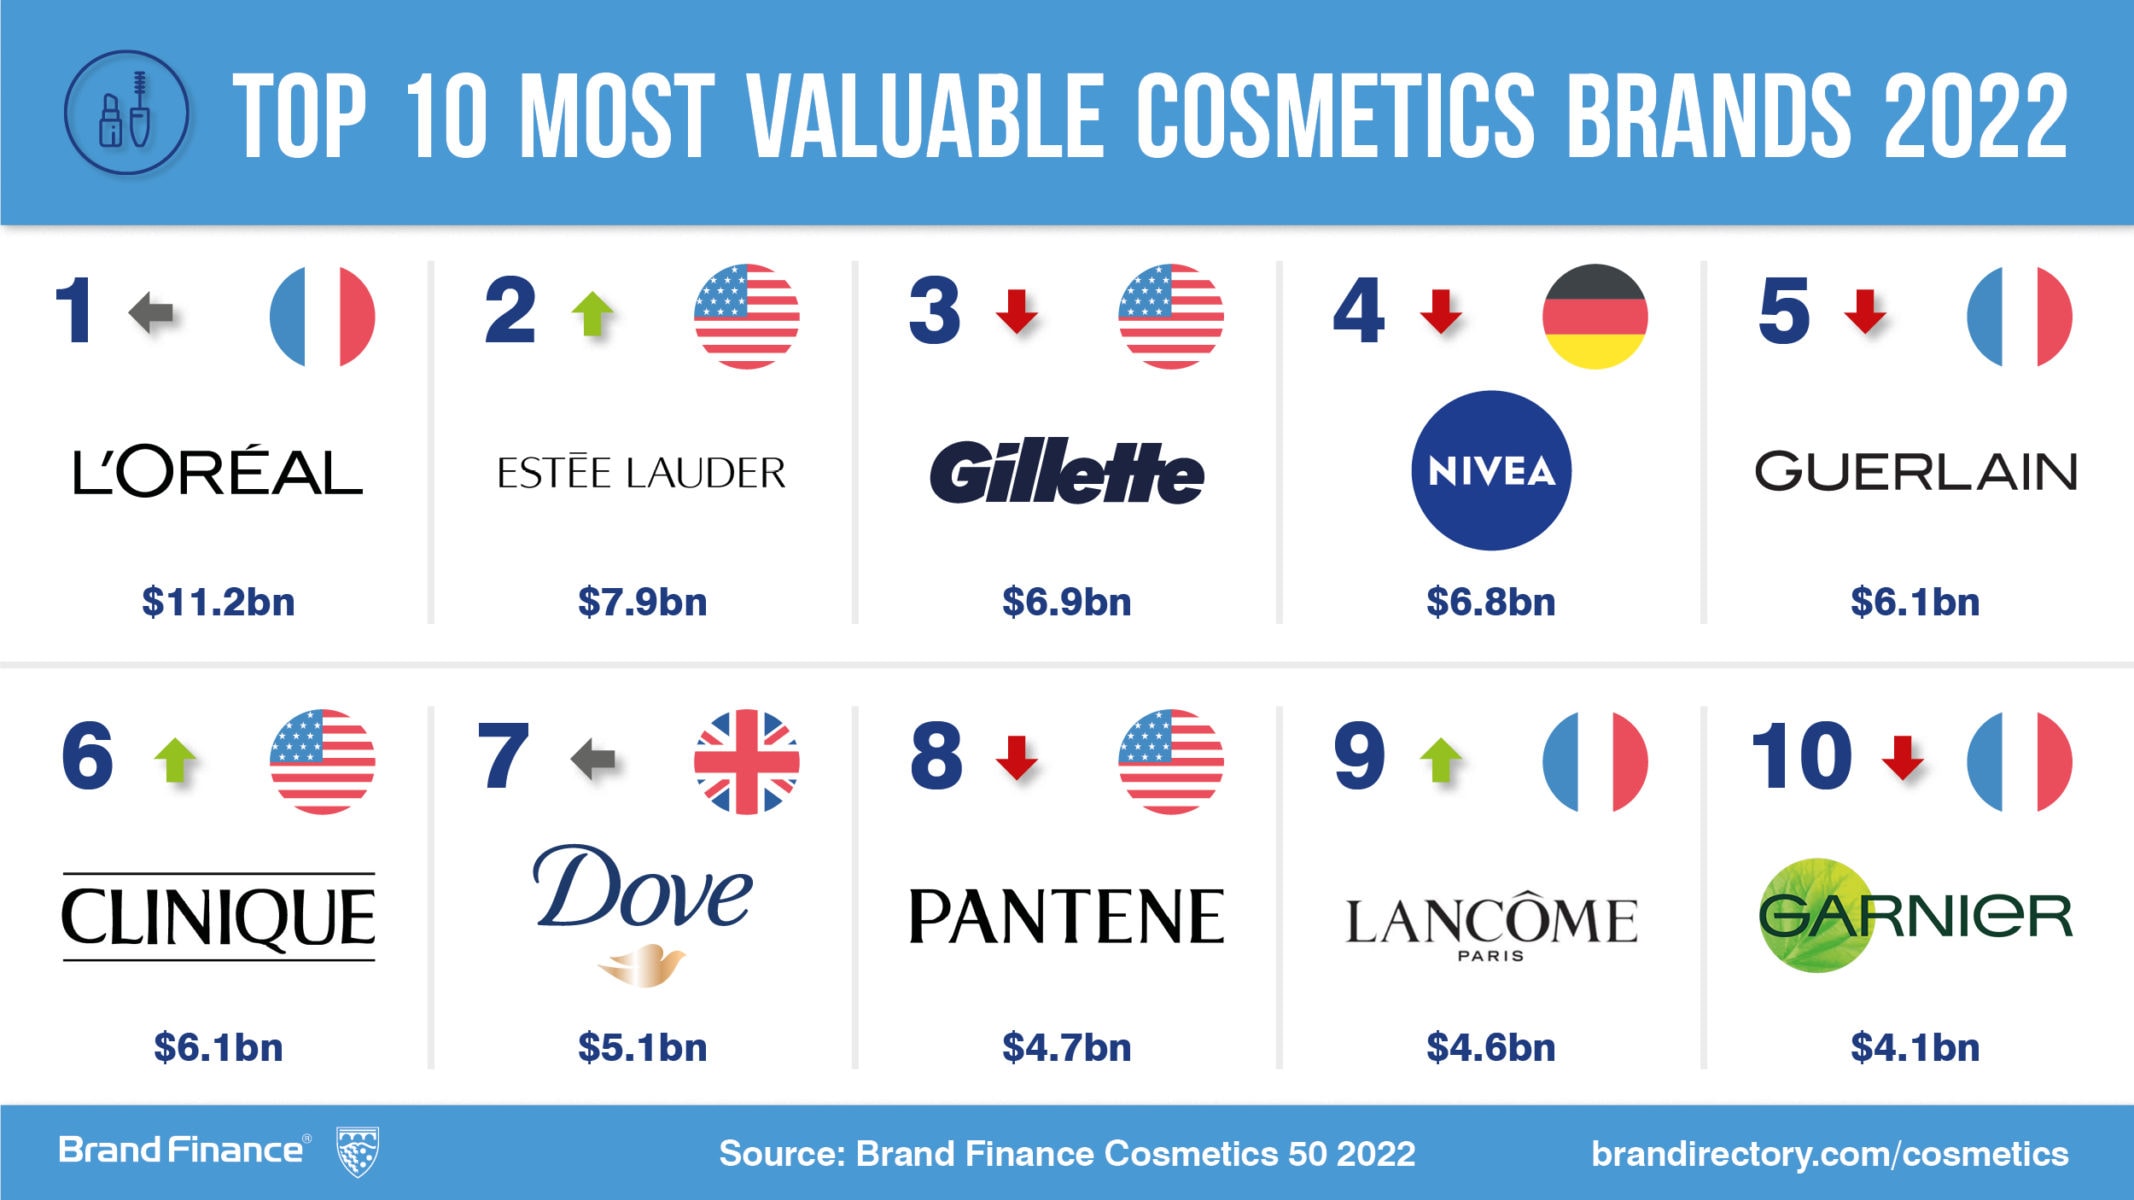 L'Oréal is looking good as world’s most valuable cosmetics brand